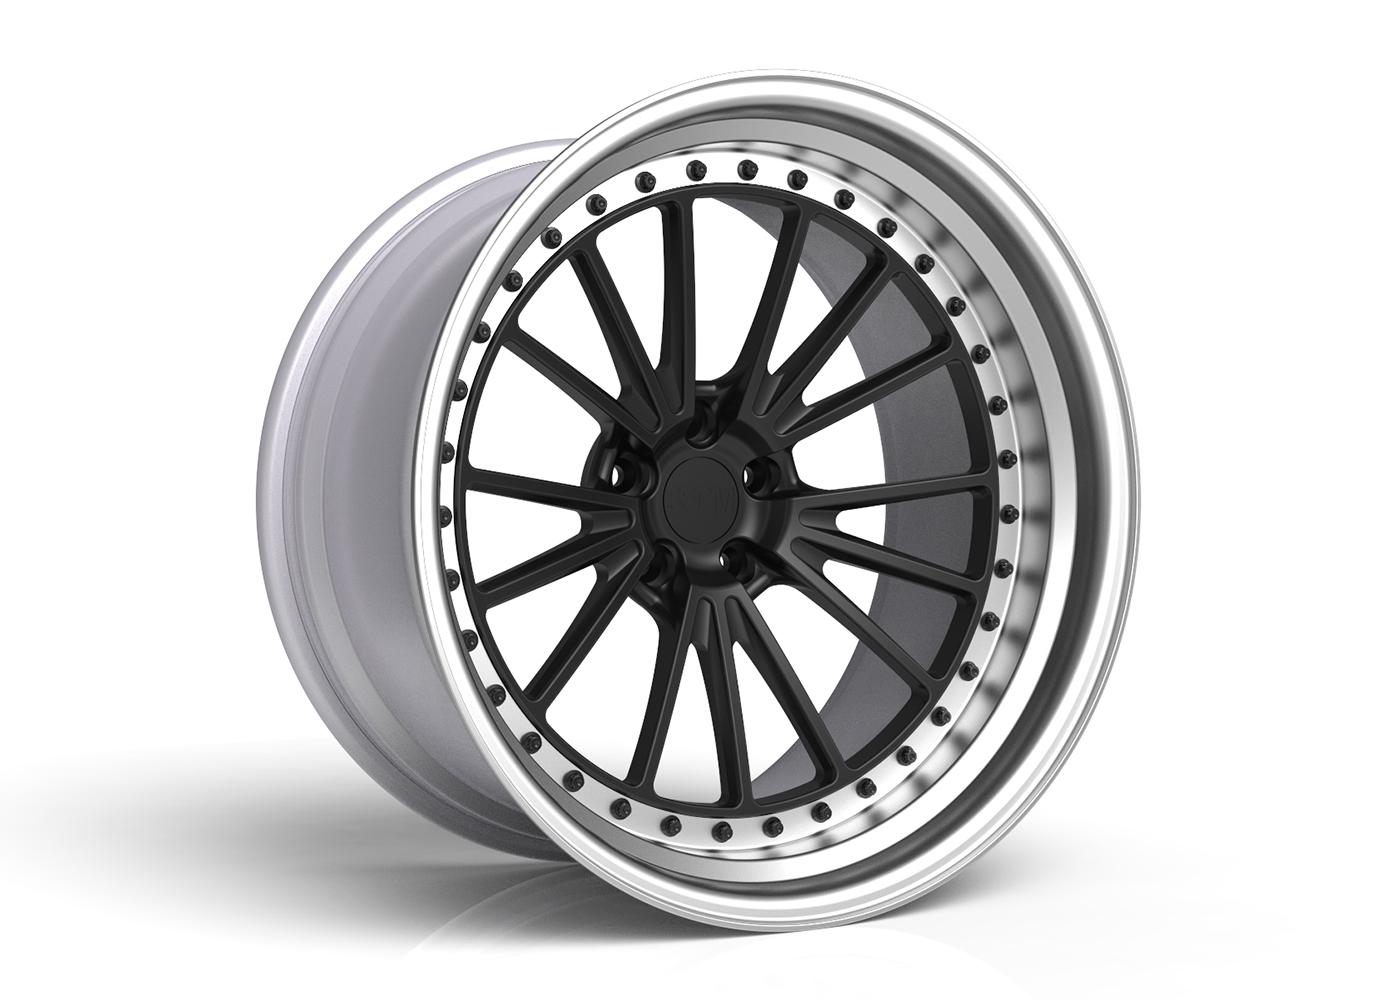 3SDM | Cast & Forged Alloy Wheel Brand 3.52l Forged 3.52  